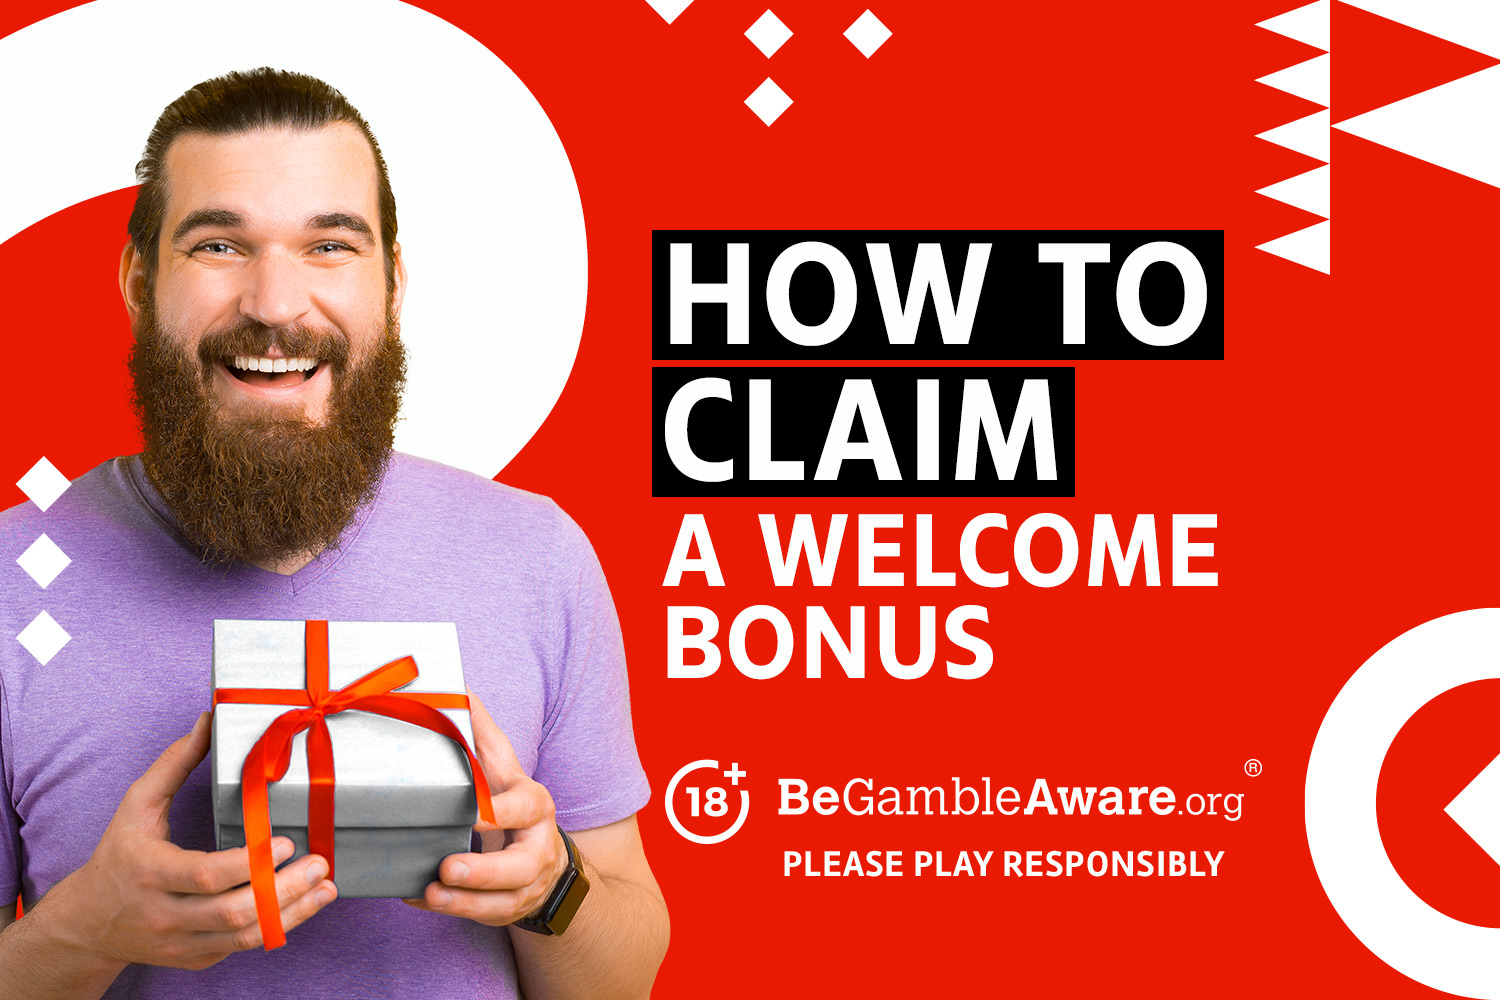 How to claim a welcome bonus. BeGambeAware.org - Please play responsibly